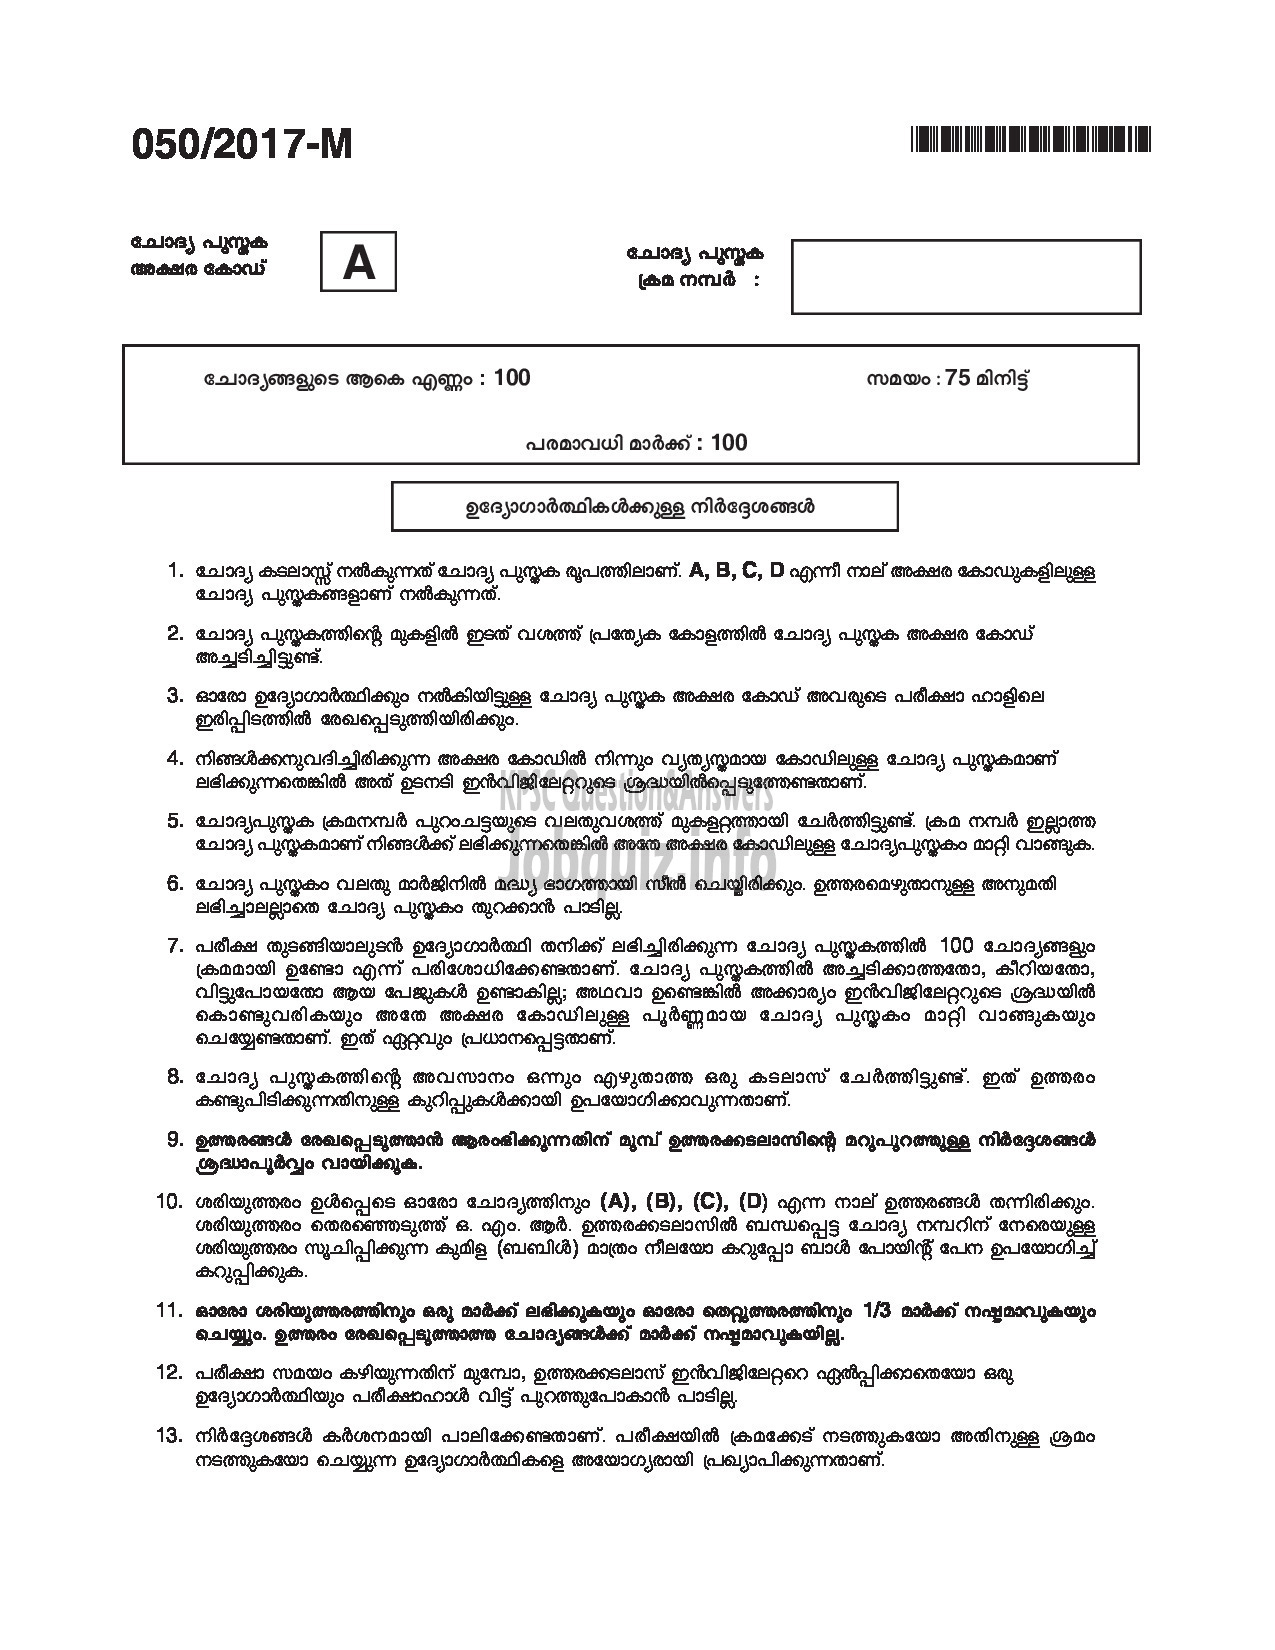 Kerala PSC Question Paper - LDC SR FOR SC/ST, SR FROM DIFFERENTLY ABLED CANDIDATES CAT.NO 122/16, 413/16 QUESTION PAPER (MALAYALAM)-1